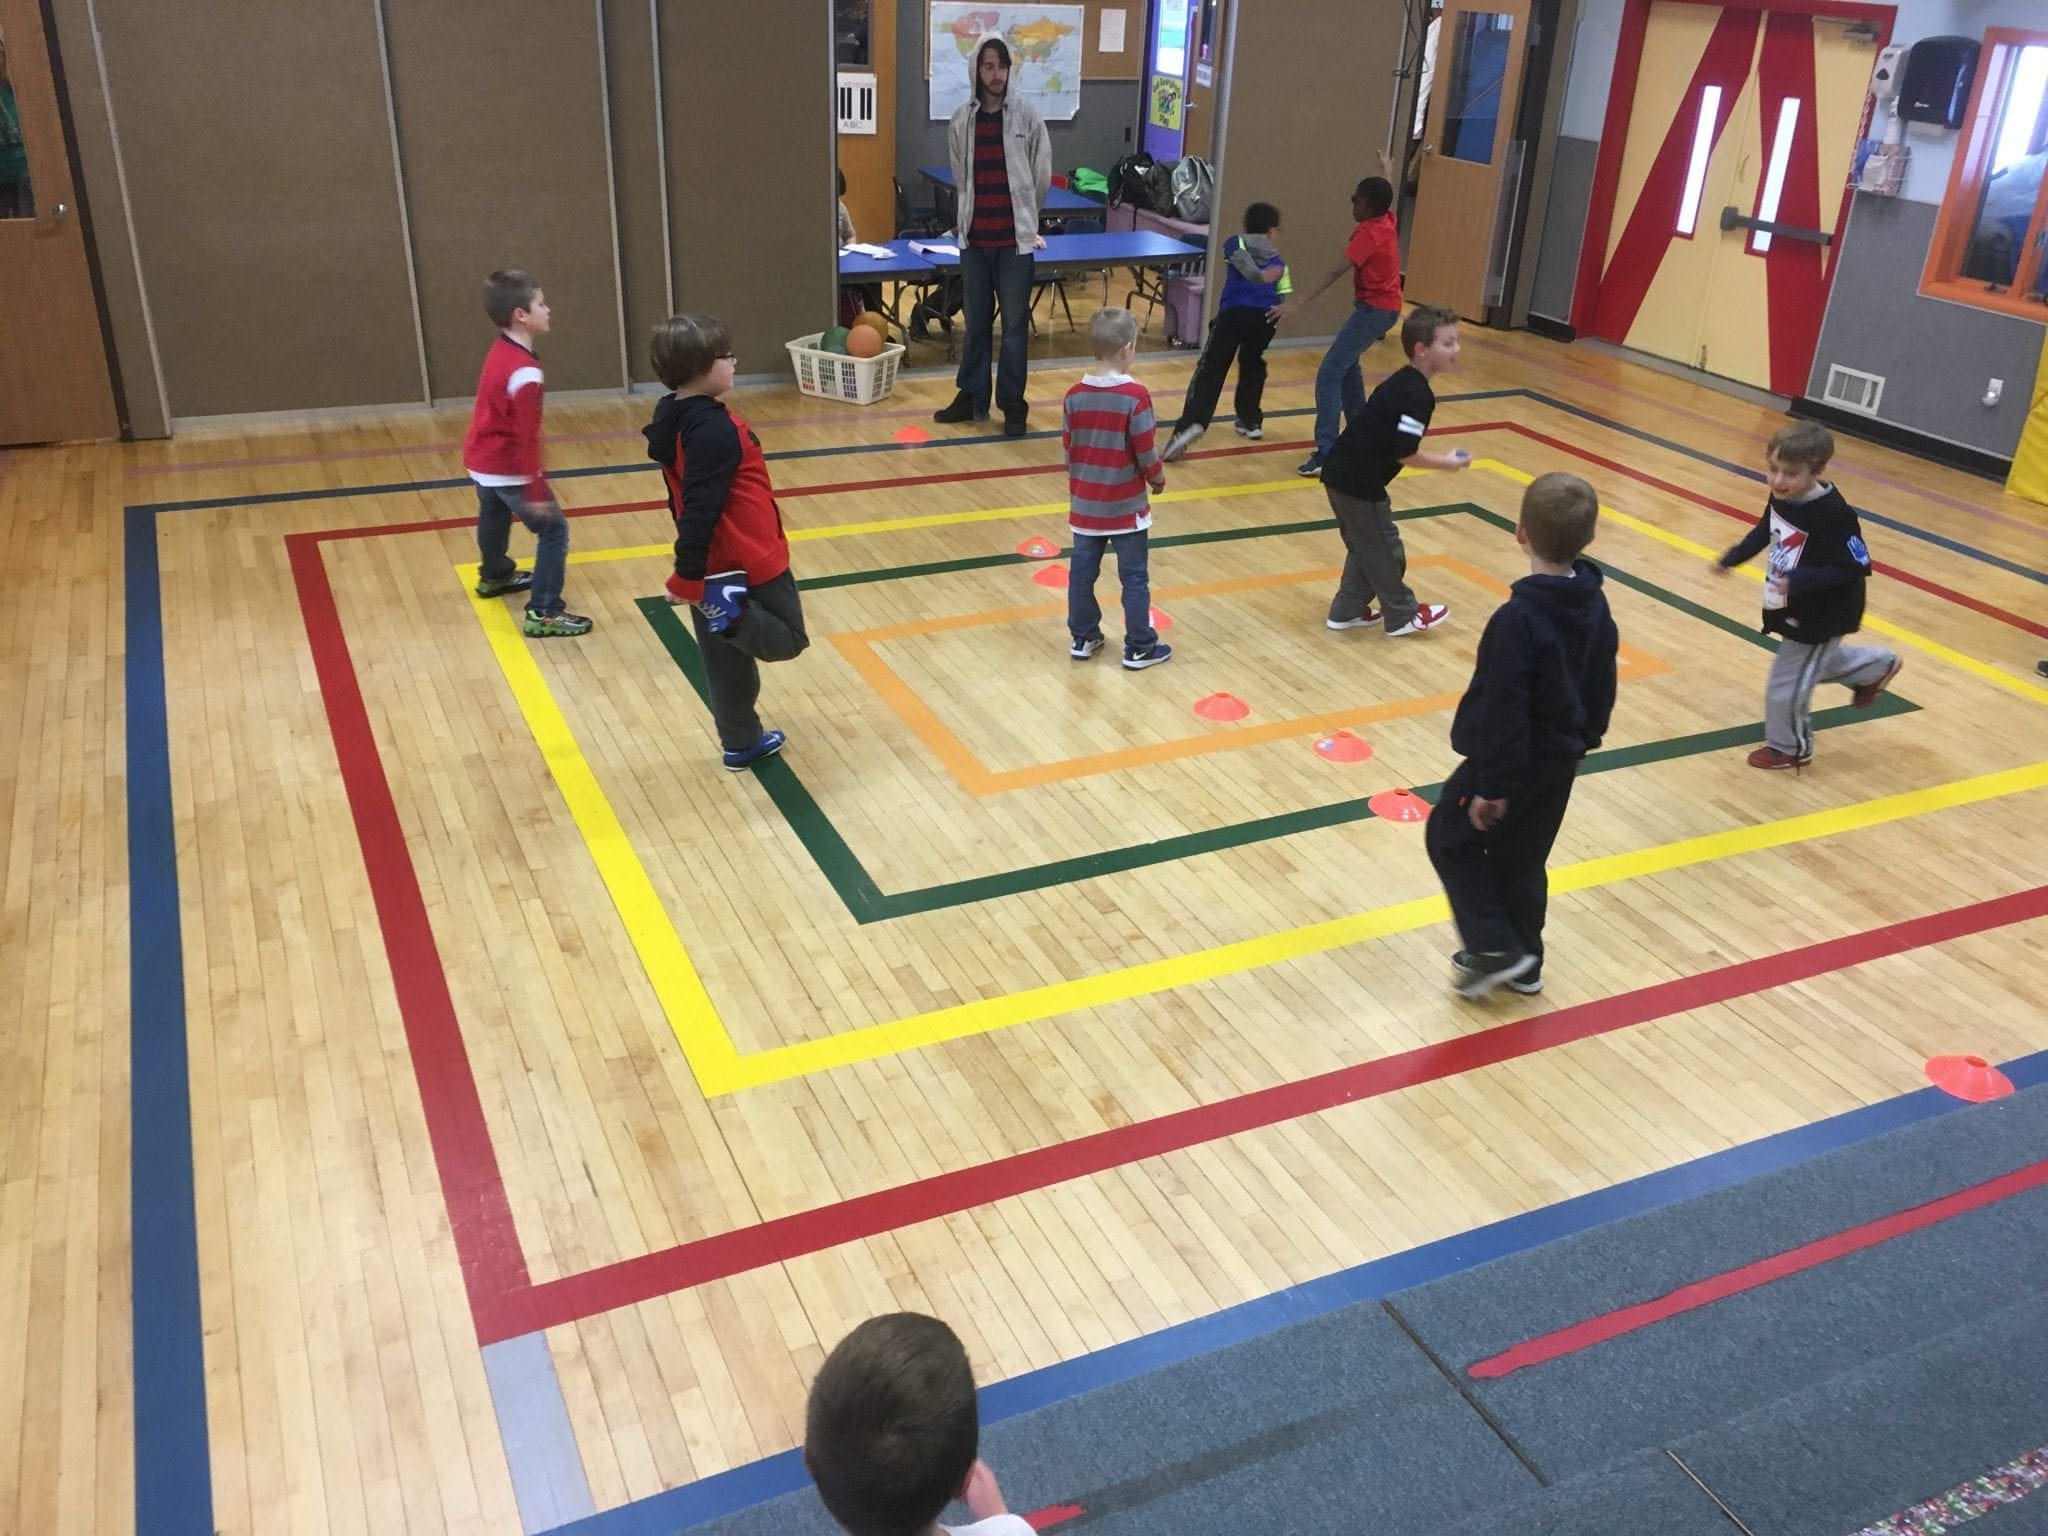 kids playing in the gym at stay and play club after school program